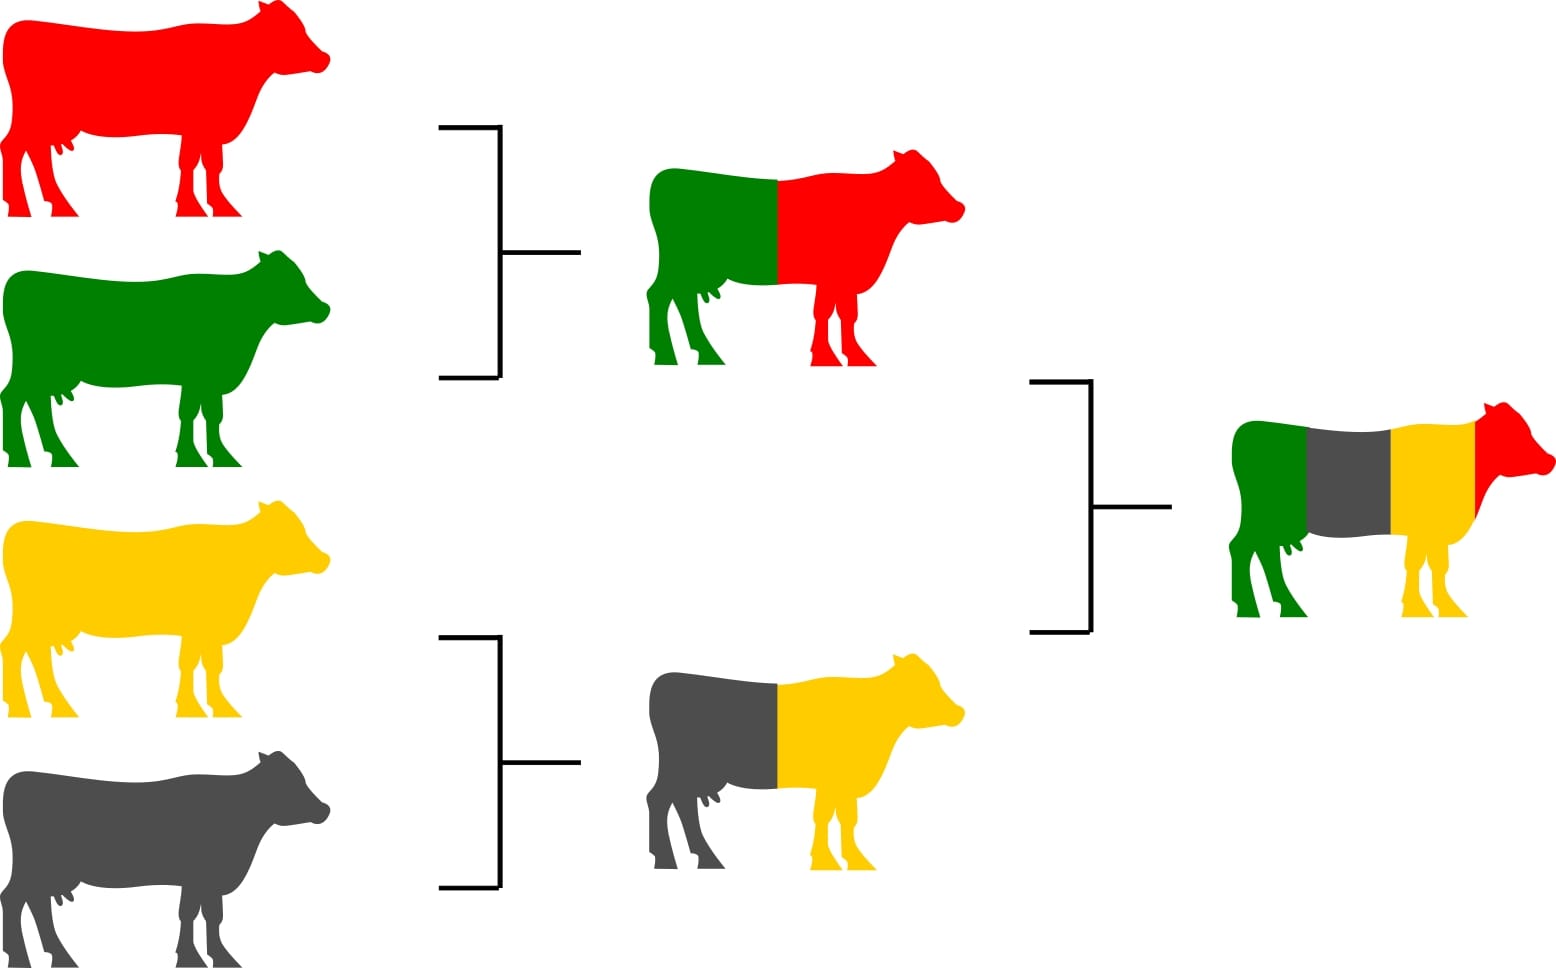 n this system, you would mix traits of economic value from many different breeds and create a composite straight-bred herd.